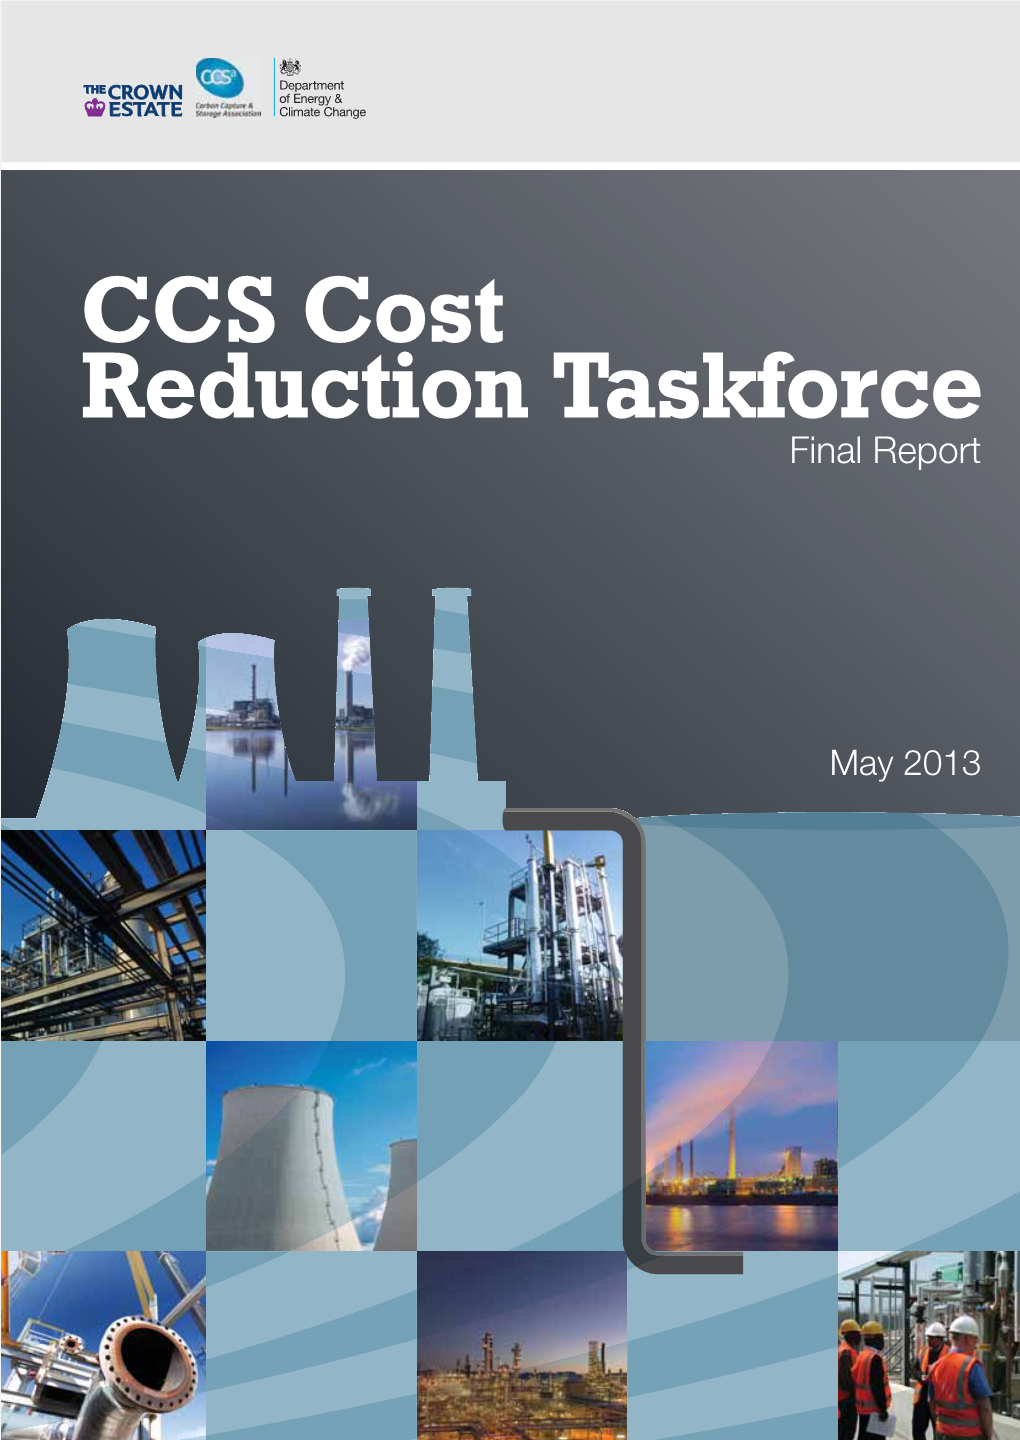 CCS Cost Reduction Taskforce Final Report